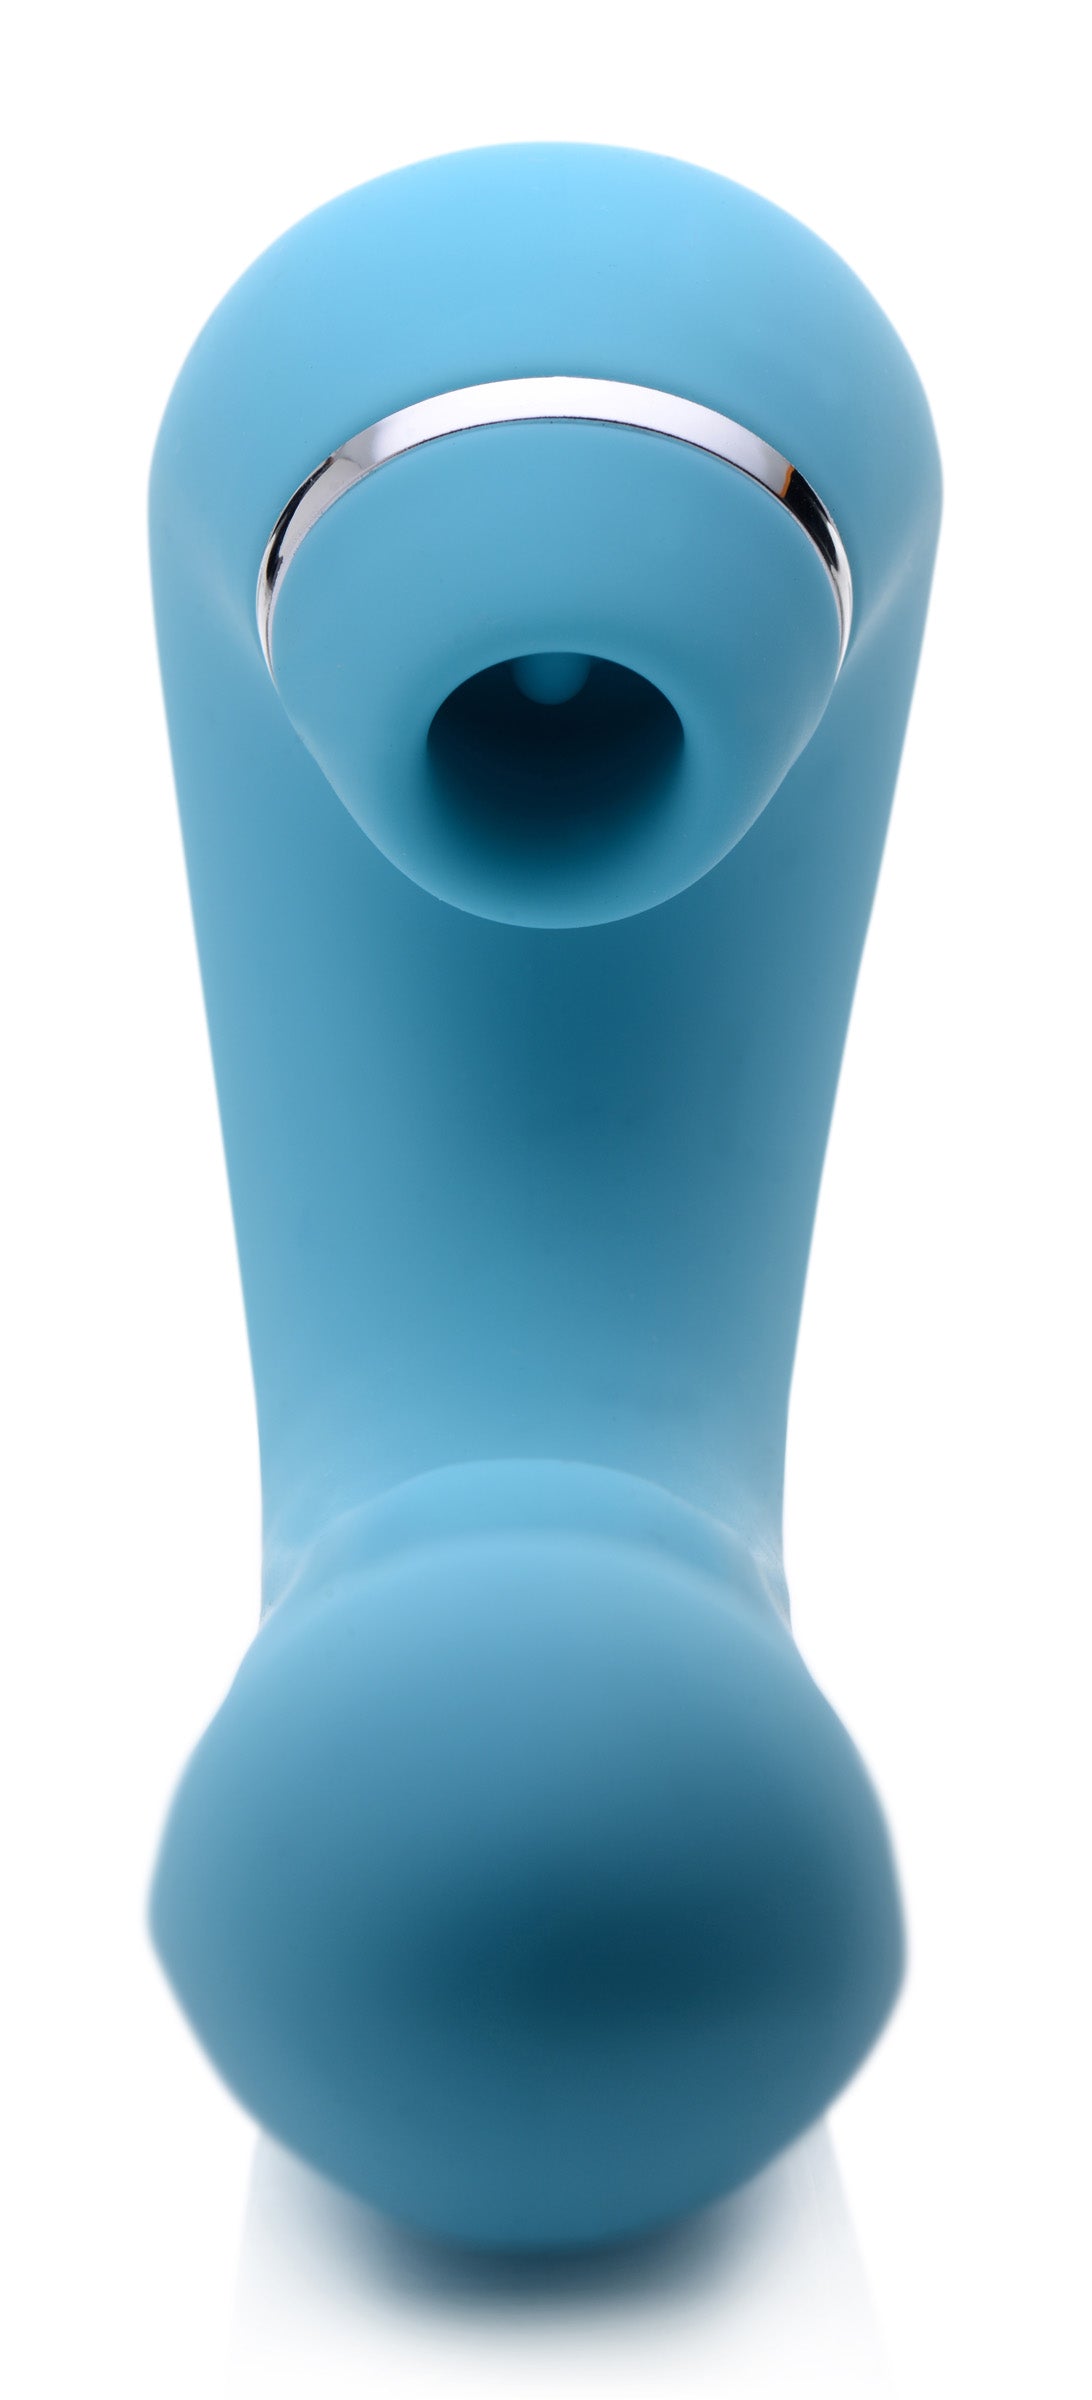 Shegasm 5 Star 10X Tapping G-Spot Silicone Vibrator with Suction - Teal - UABDSM